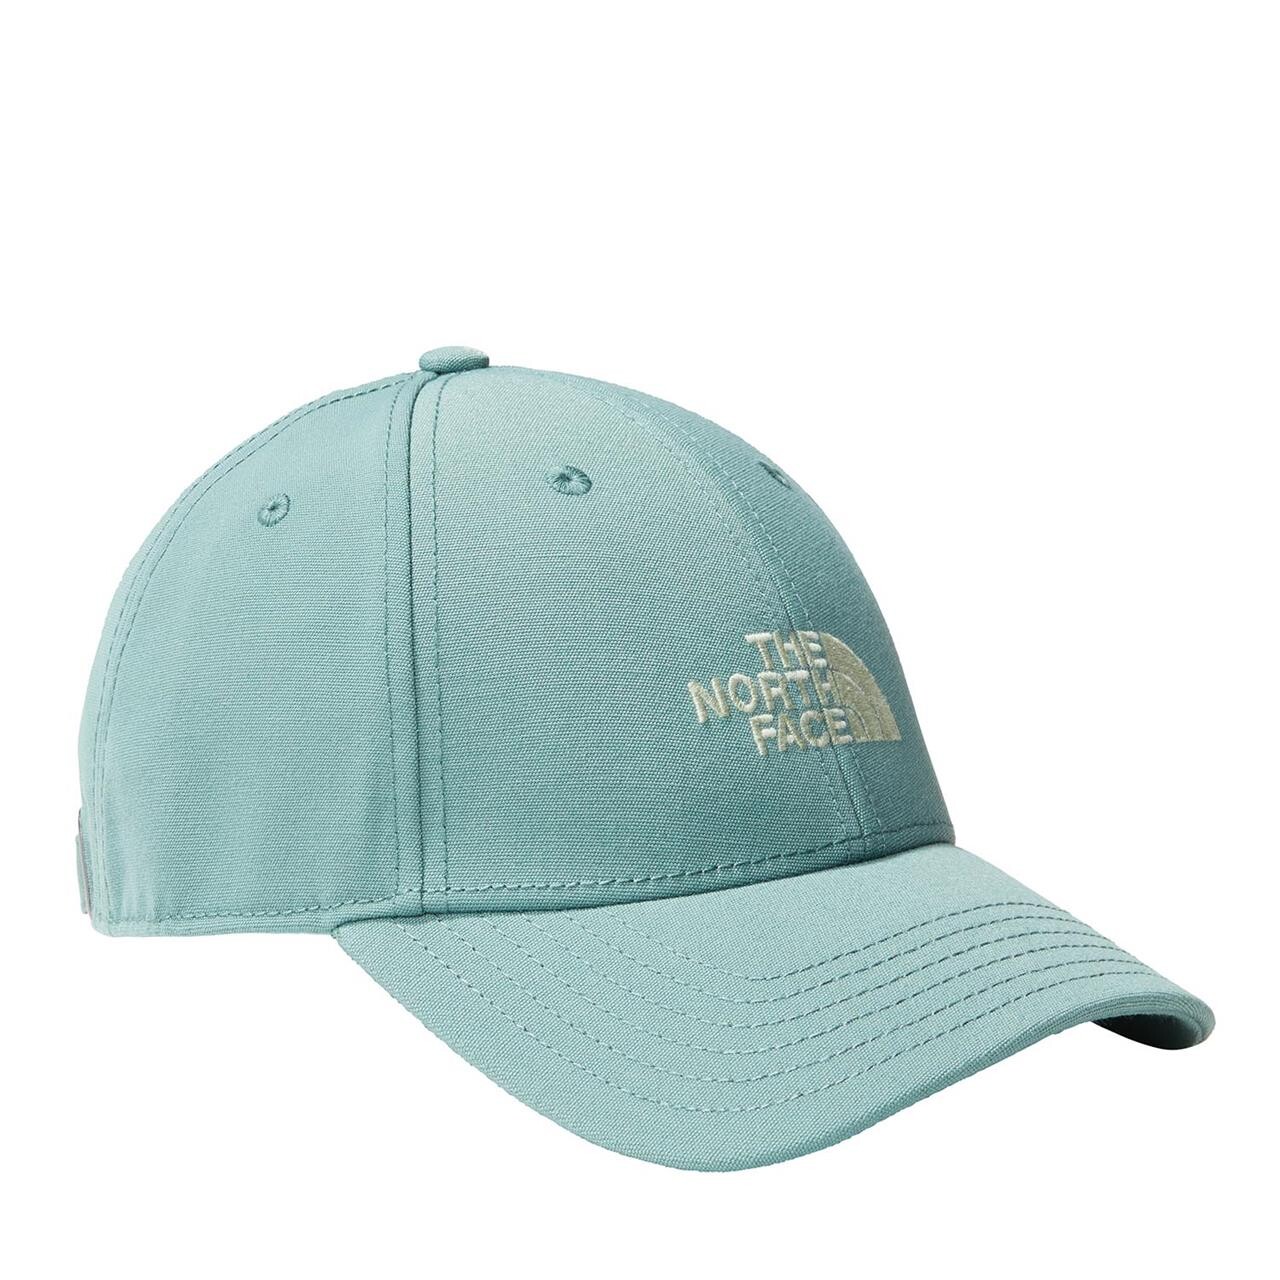 14: The North Face Recycled 66 Classic Hat (Grøn (DARK SAGE/MISTY SAGE) One size)